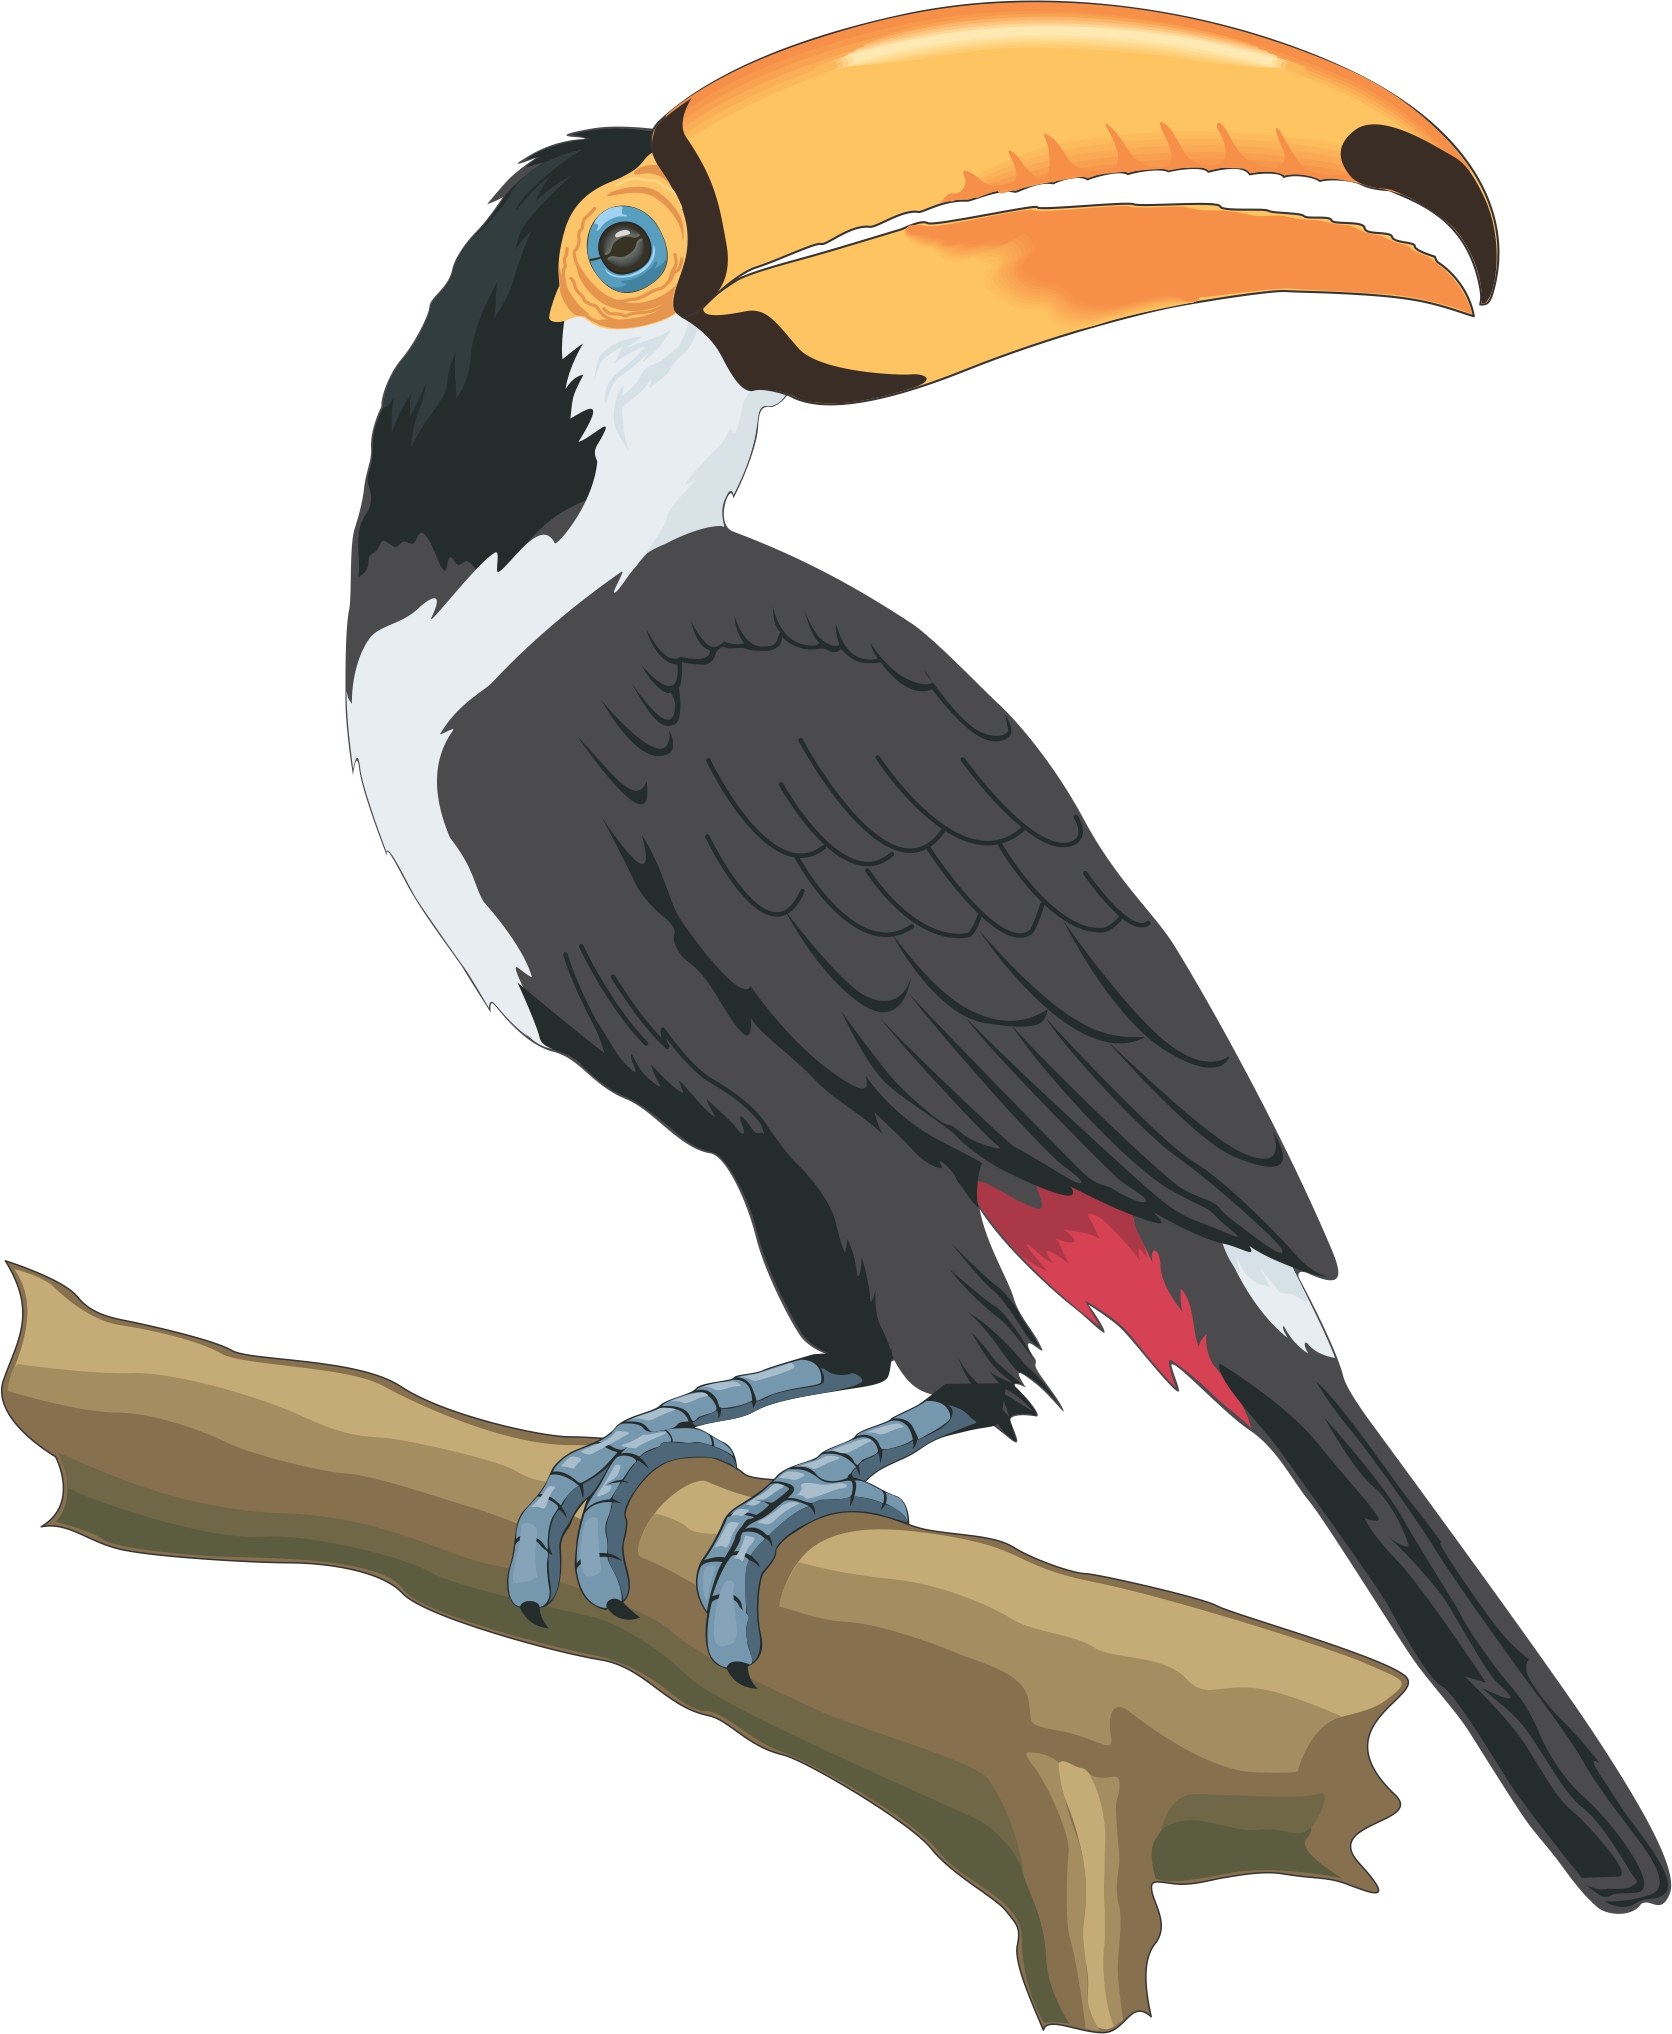 Cartoon Toucan Pictures - Cliparts.co